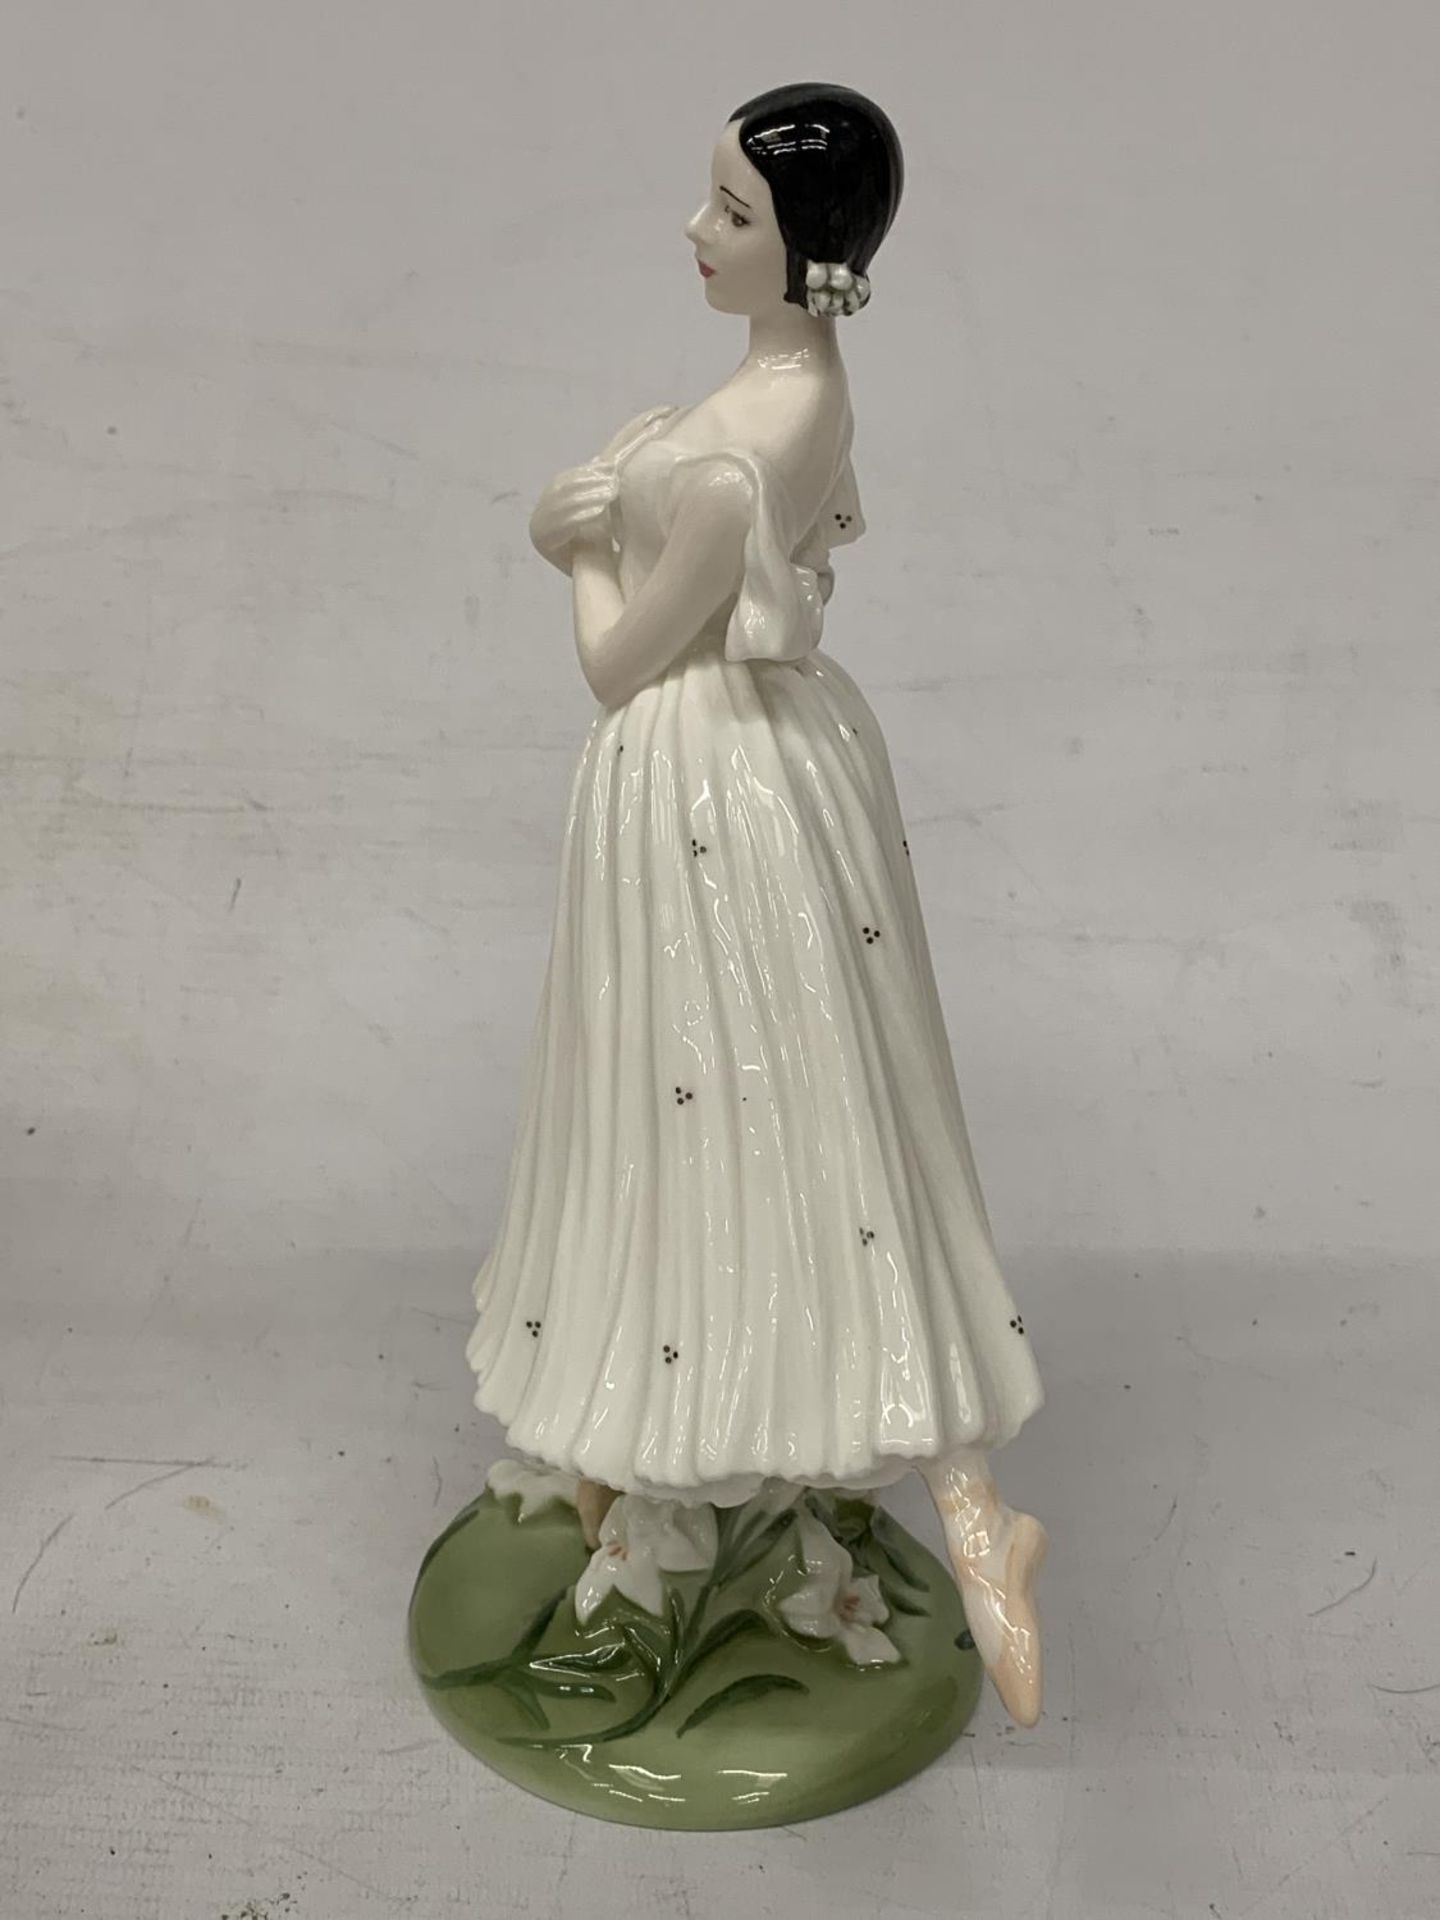 A COALPORT FIGURINE "DAME ALICE MARKOVA" IN THE ROYAL ACADEMY OF DANCING COLLECTION LIMITED - Image 2 of 5